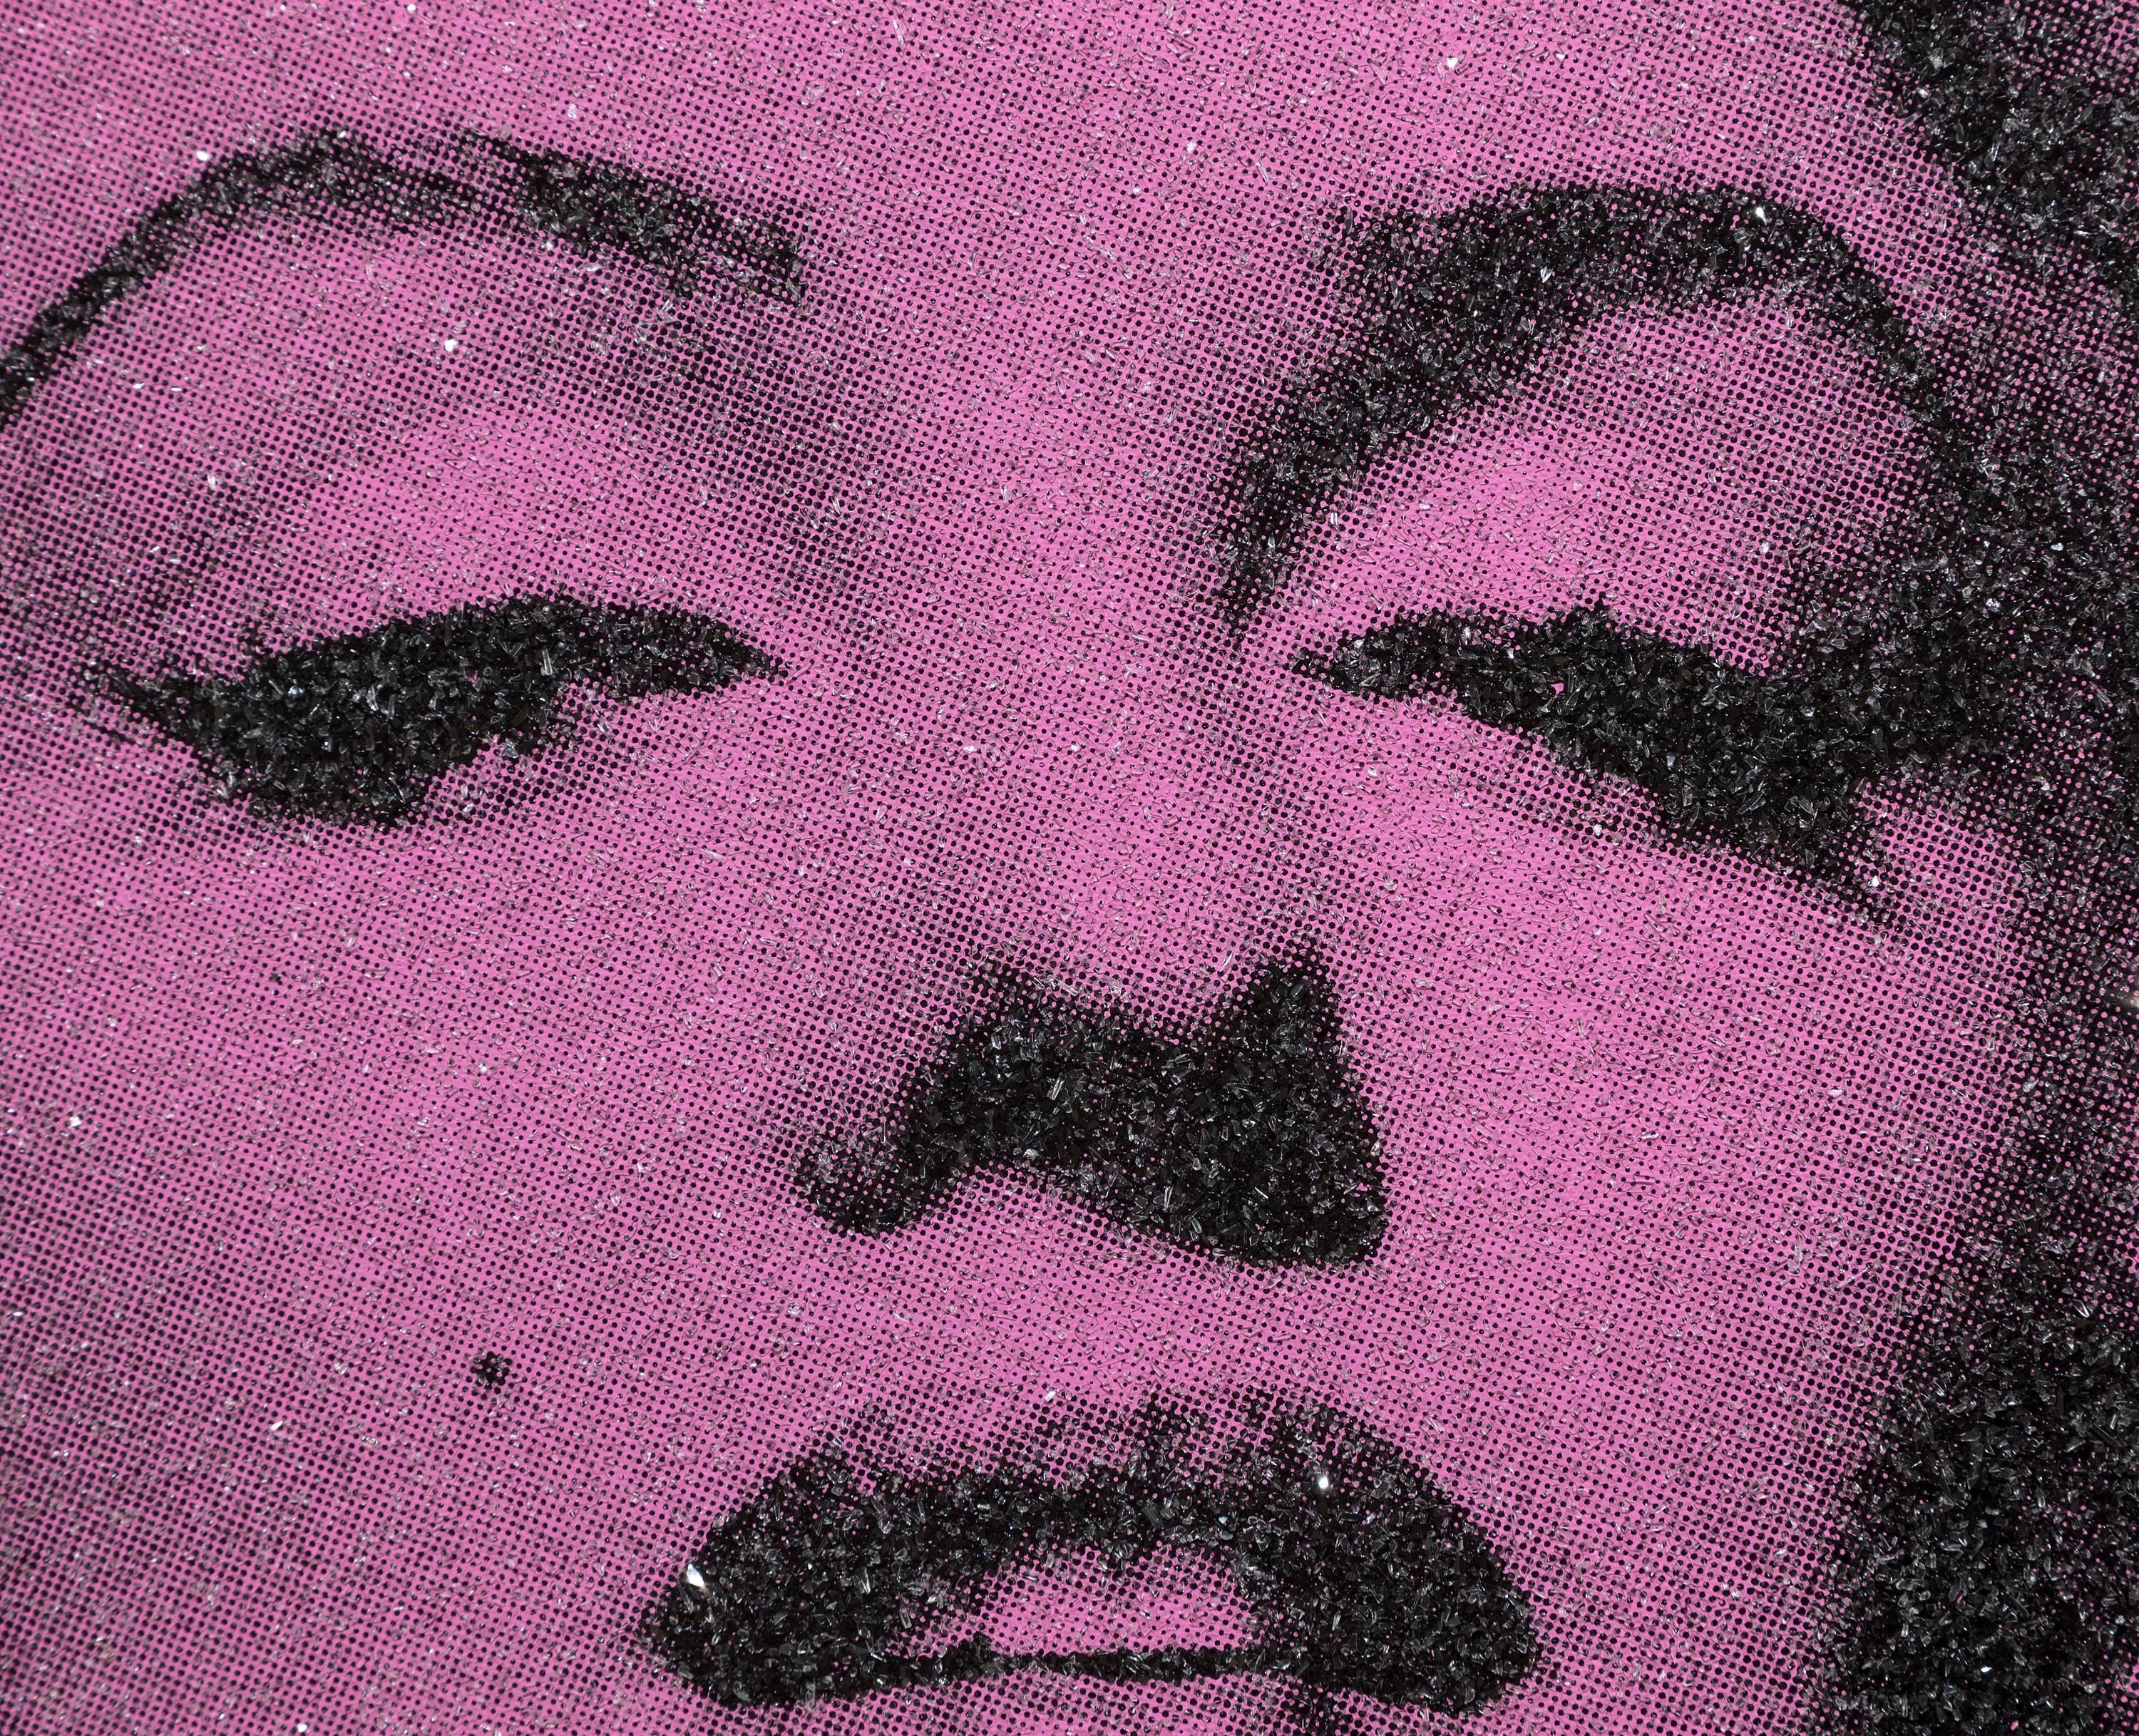 A screenprint on linen with diamond dust by contemporary artist Russell Young. "Marilyn Portrait" (Rosewood Pink and Black) depicts an iconic image of Marilyn Monroe and is signed verso, "Russell Young, 2014, California Marilyn